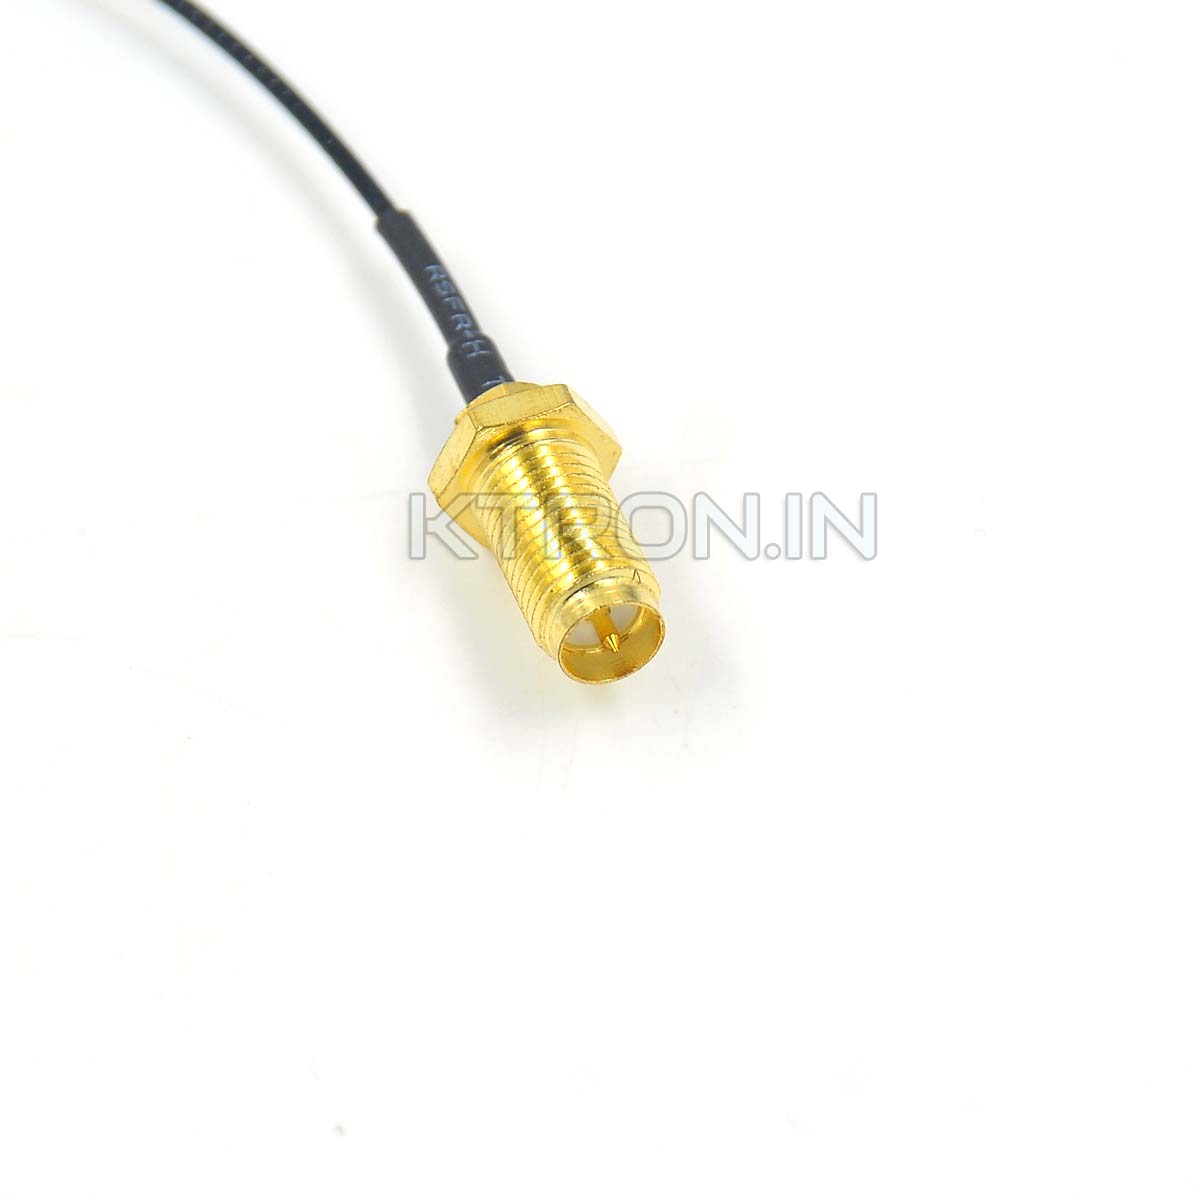 3G Antenna 2dbi Gsm SMA Male Connector SMA Female Jack to ufl./IPX 1.13 Pigtail Cable 15cm 